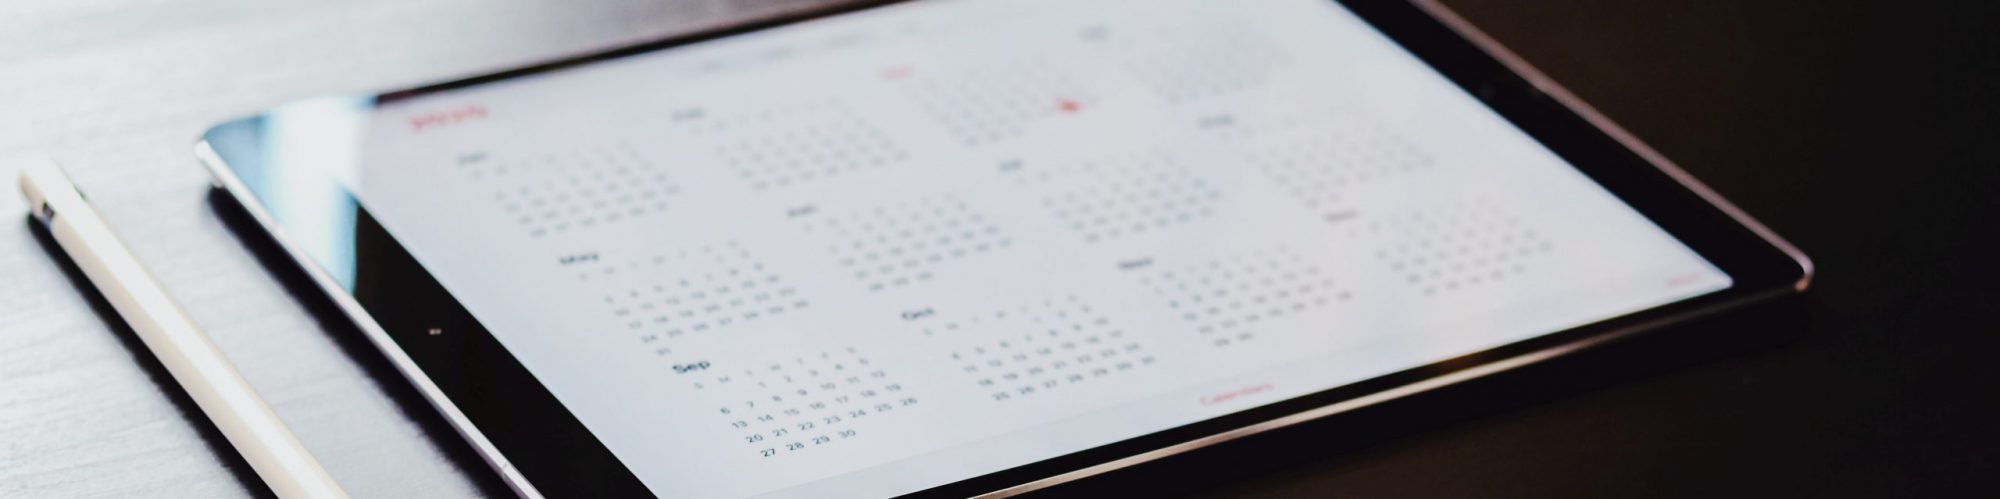 An image of a calendar on a table within music service management software